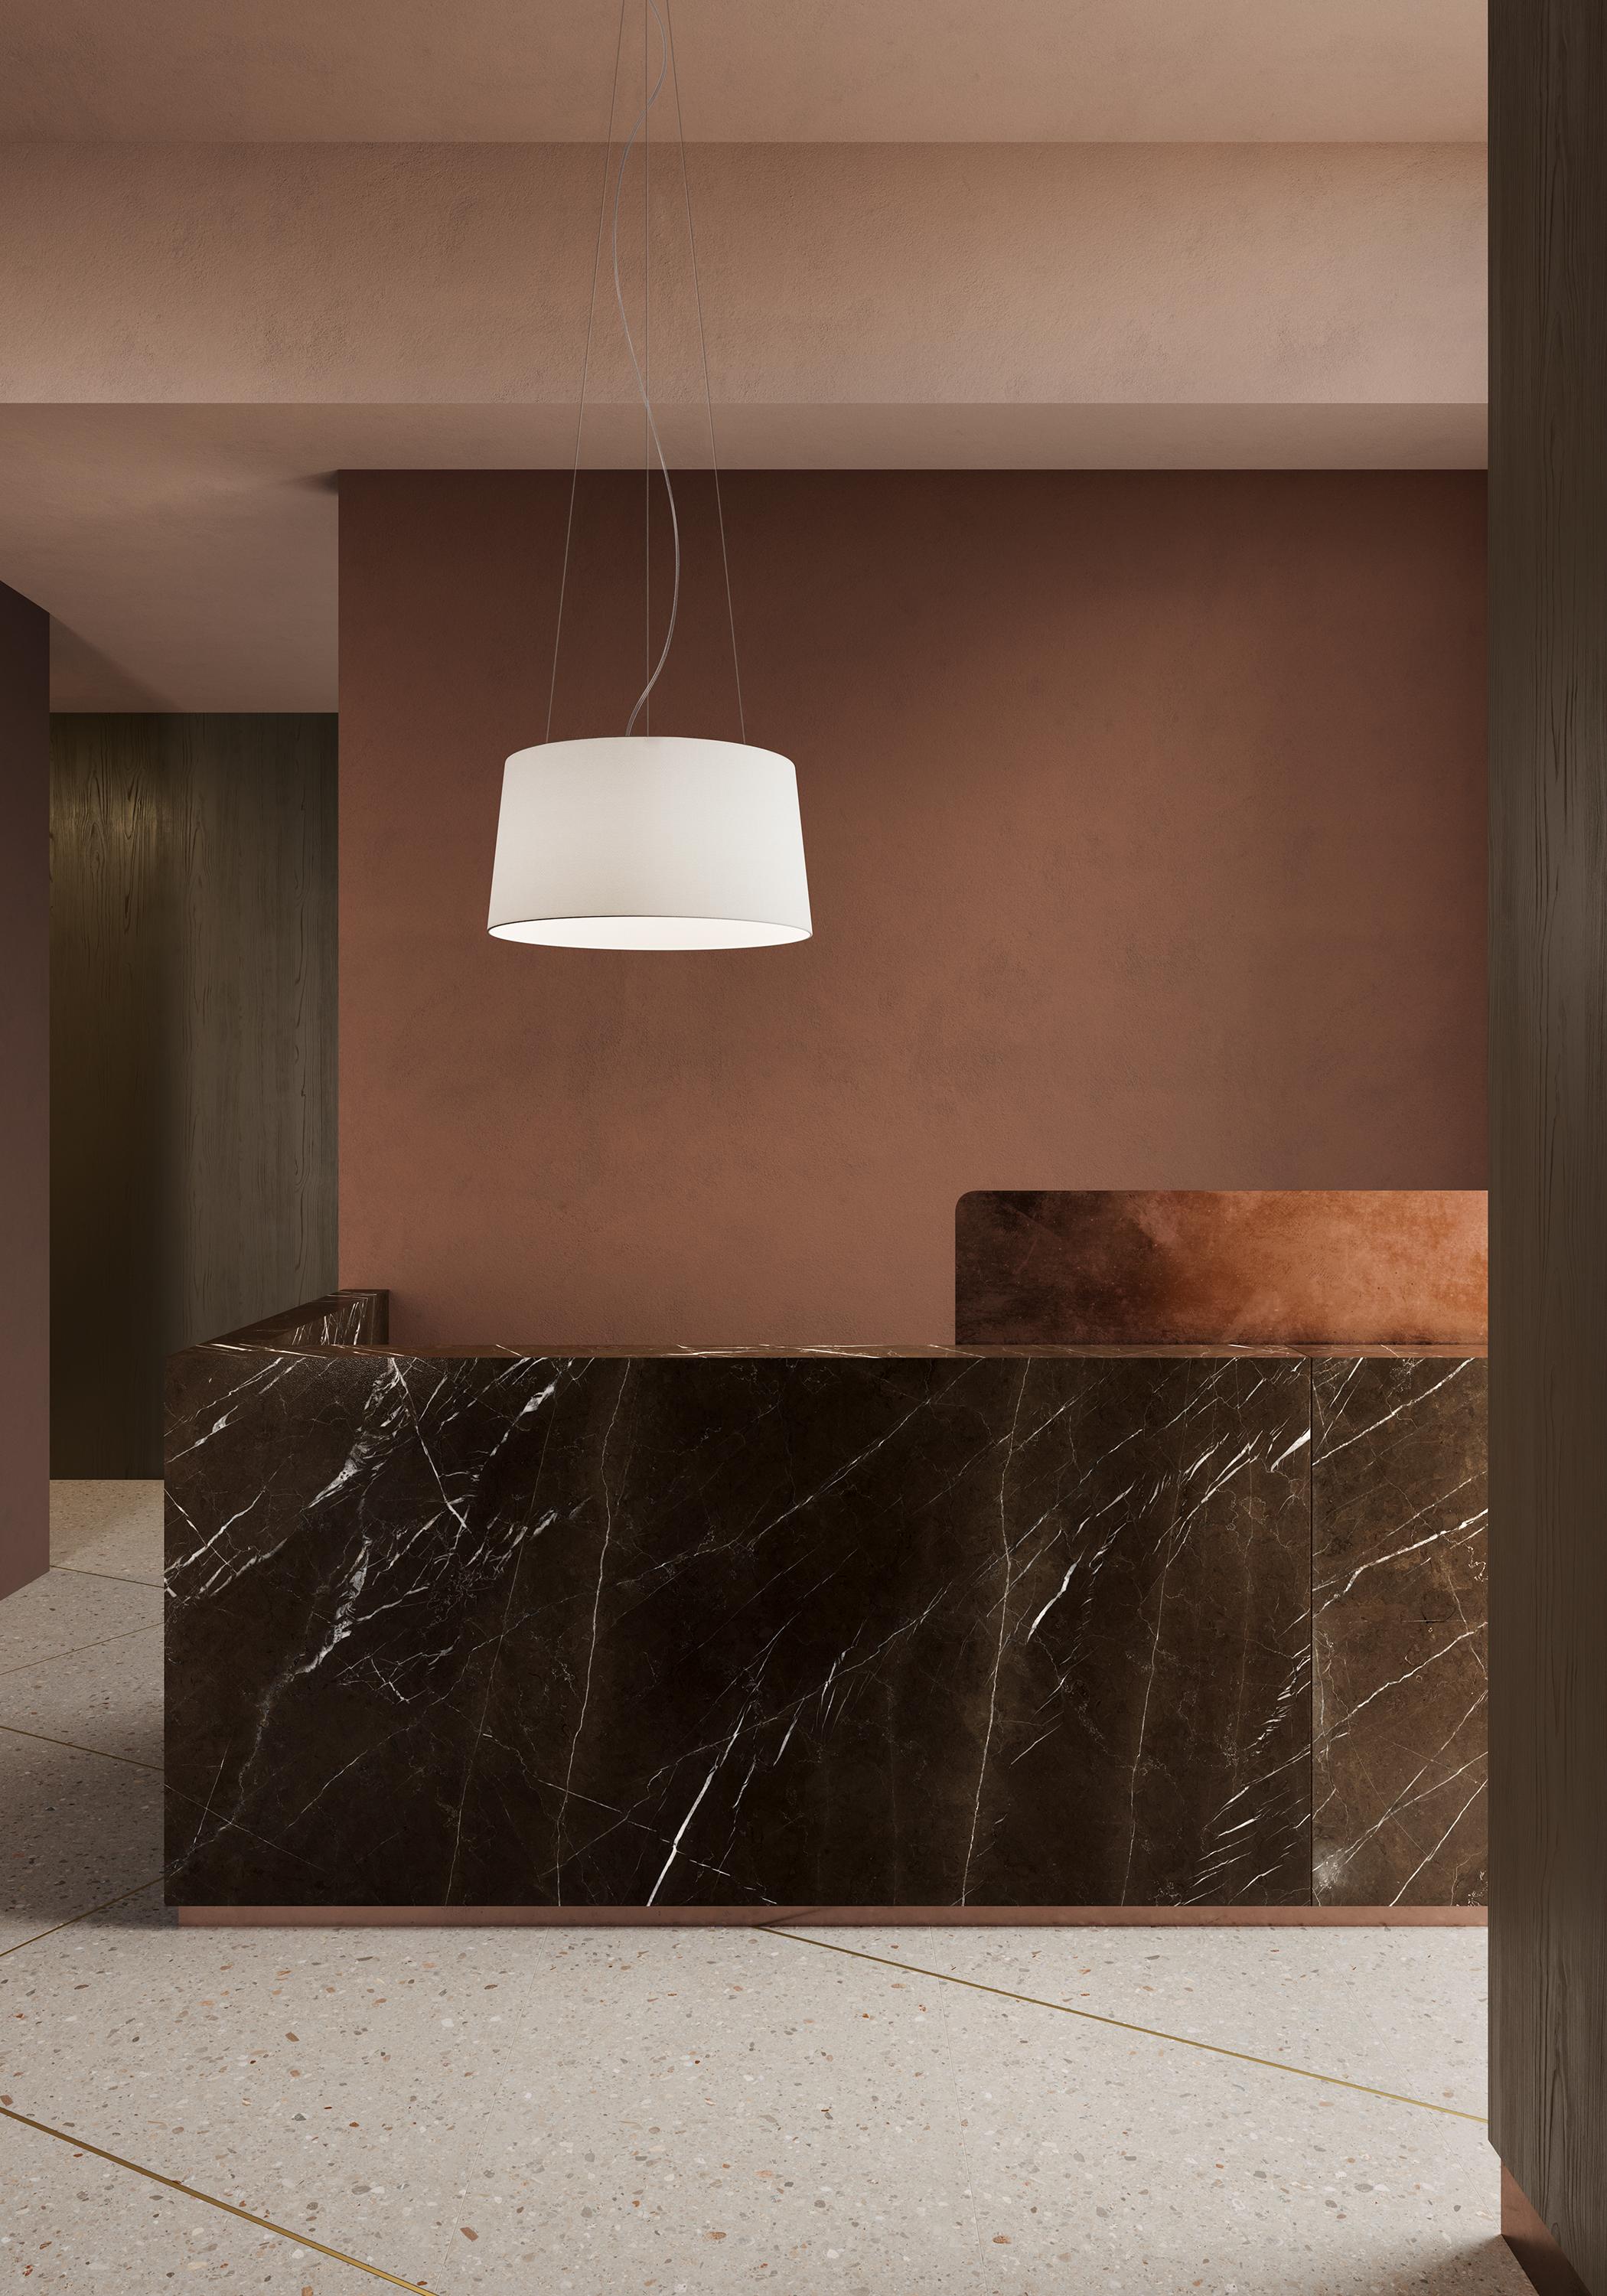 Tripod Ceiling Ecrù Finish

Purity of shapes, colours and materials. Soft, warm light. The suspended lampshade is an elegant, abstract interpretation. Lightweight and aerial, it floats in space. A perfect encounter between tradition and